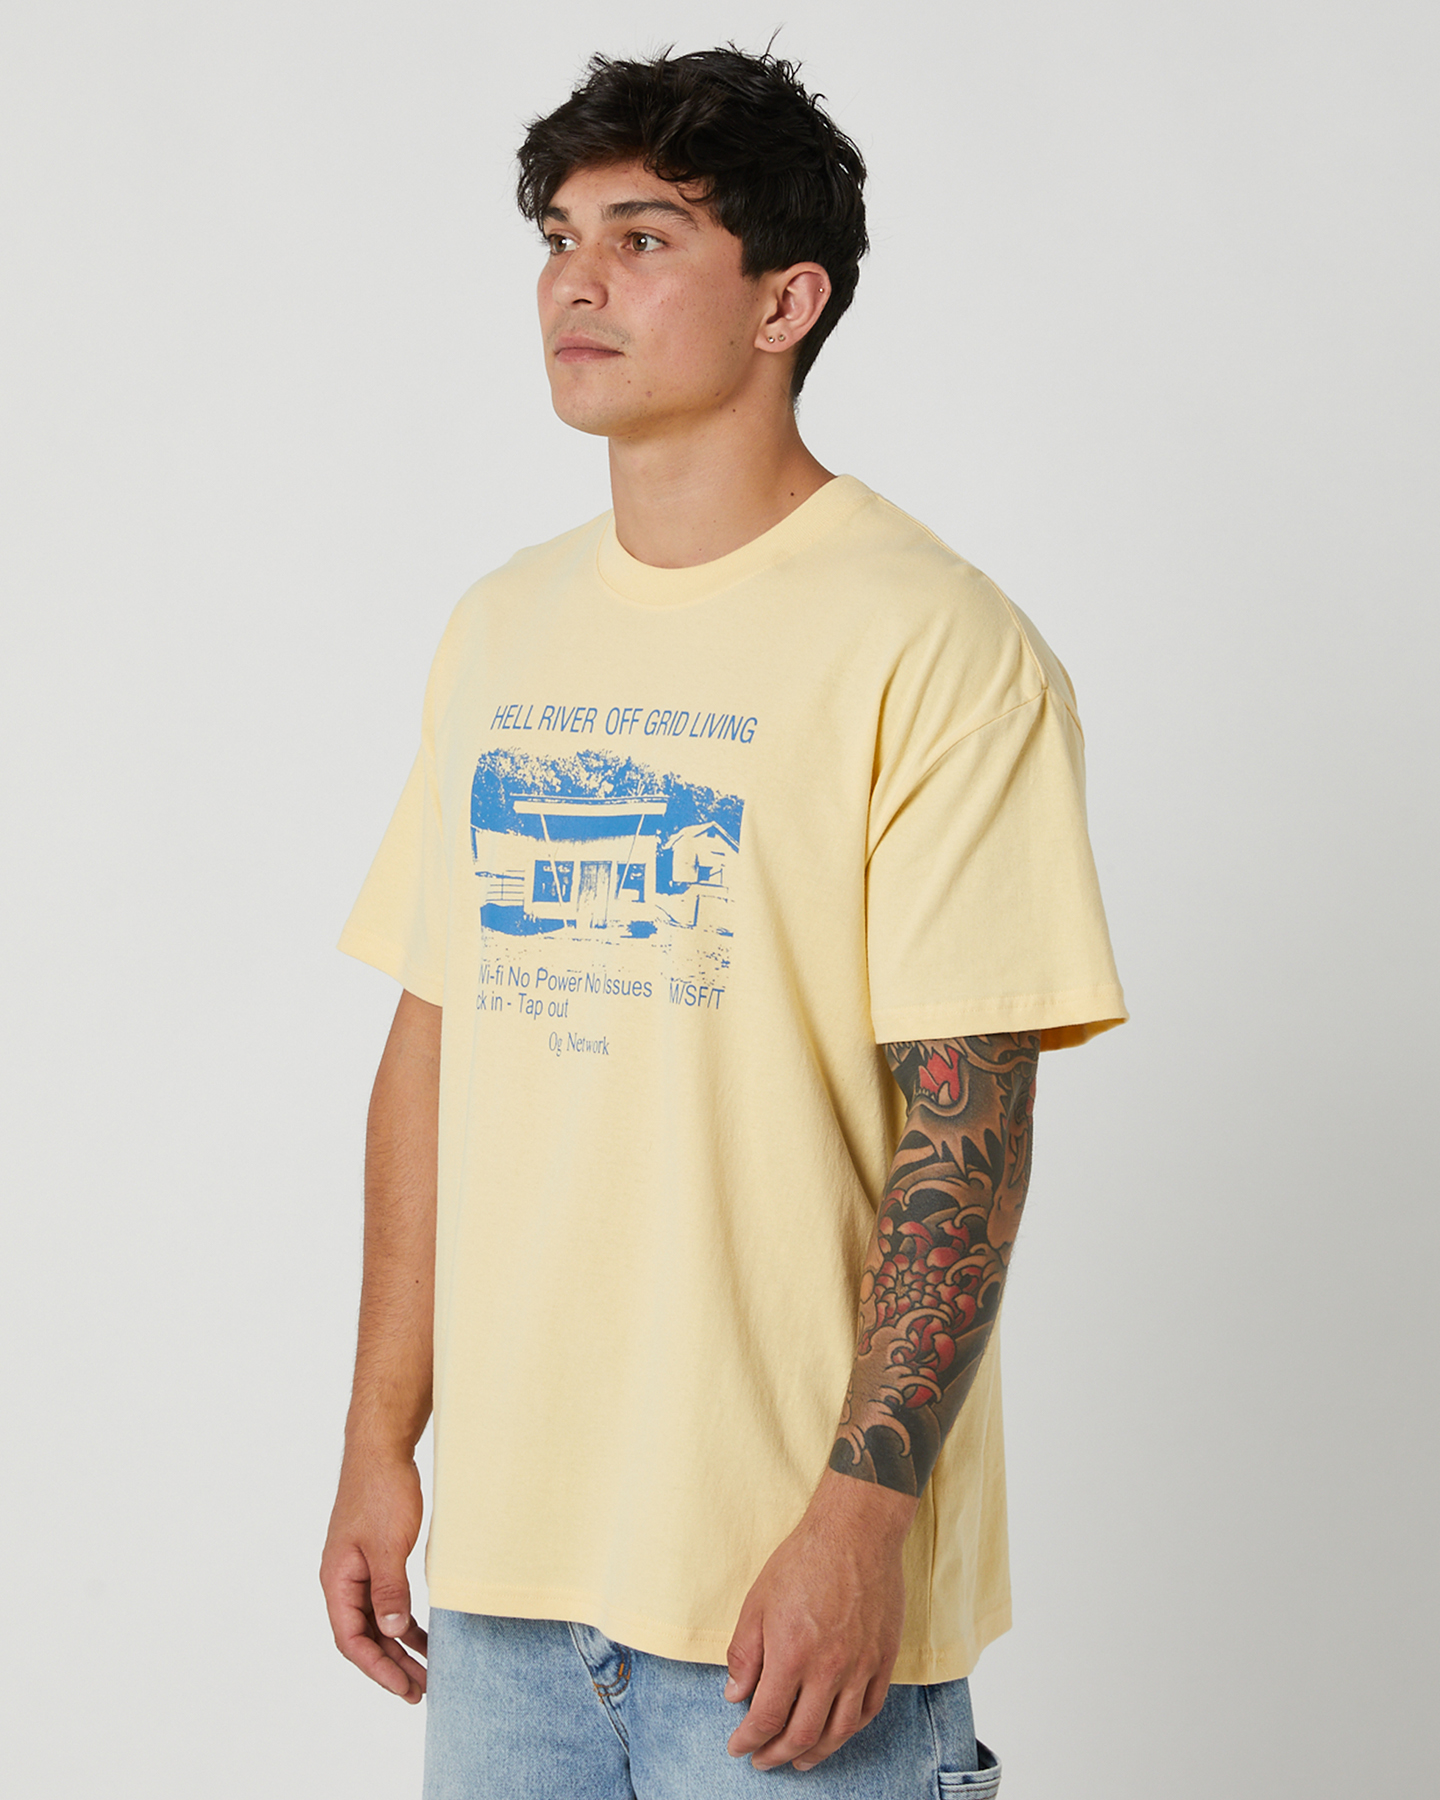 Misfit Gone Moody 50-50 Aaa Ss Tee - Solid Butter | SurfStitch